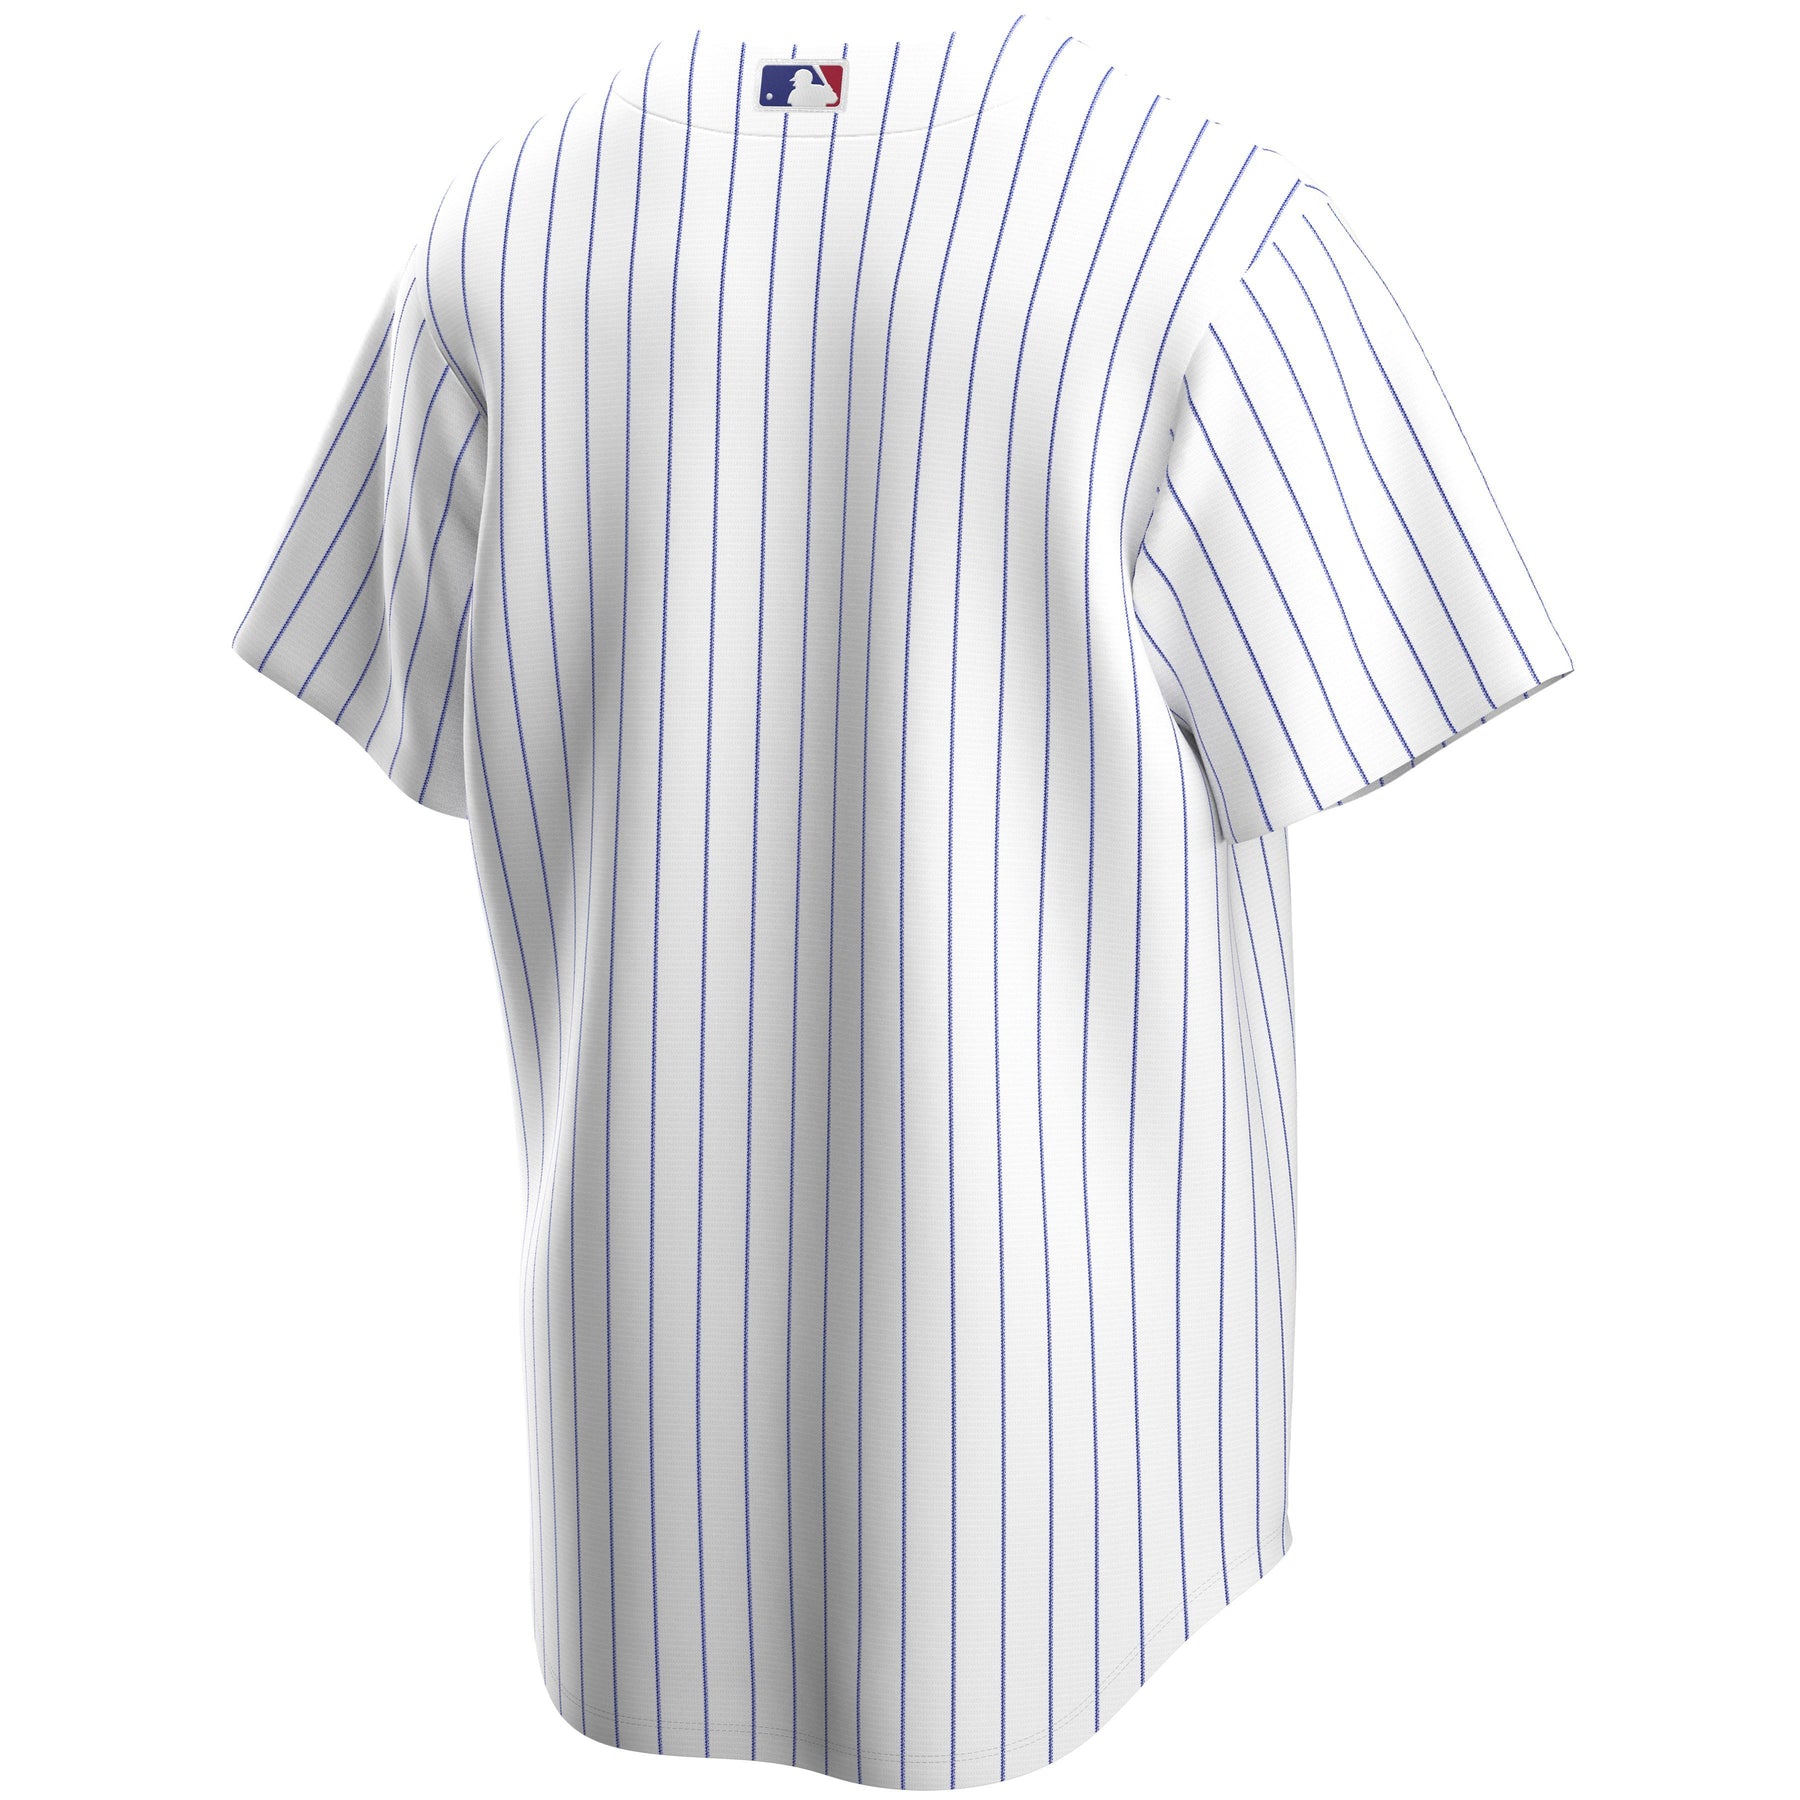 create your own cubs jersey